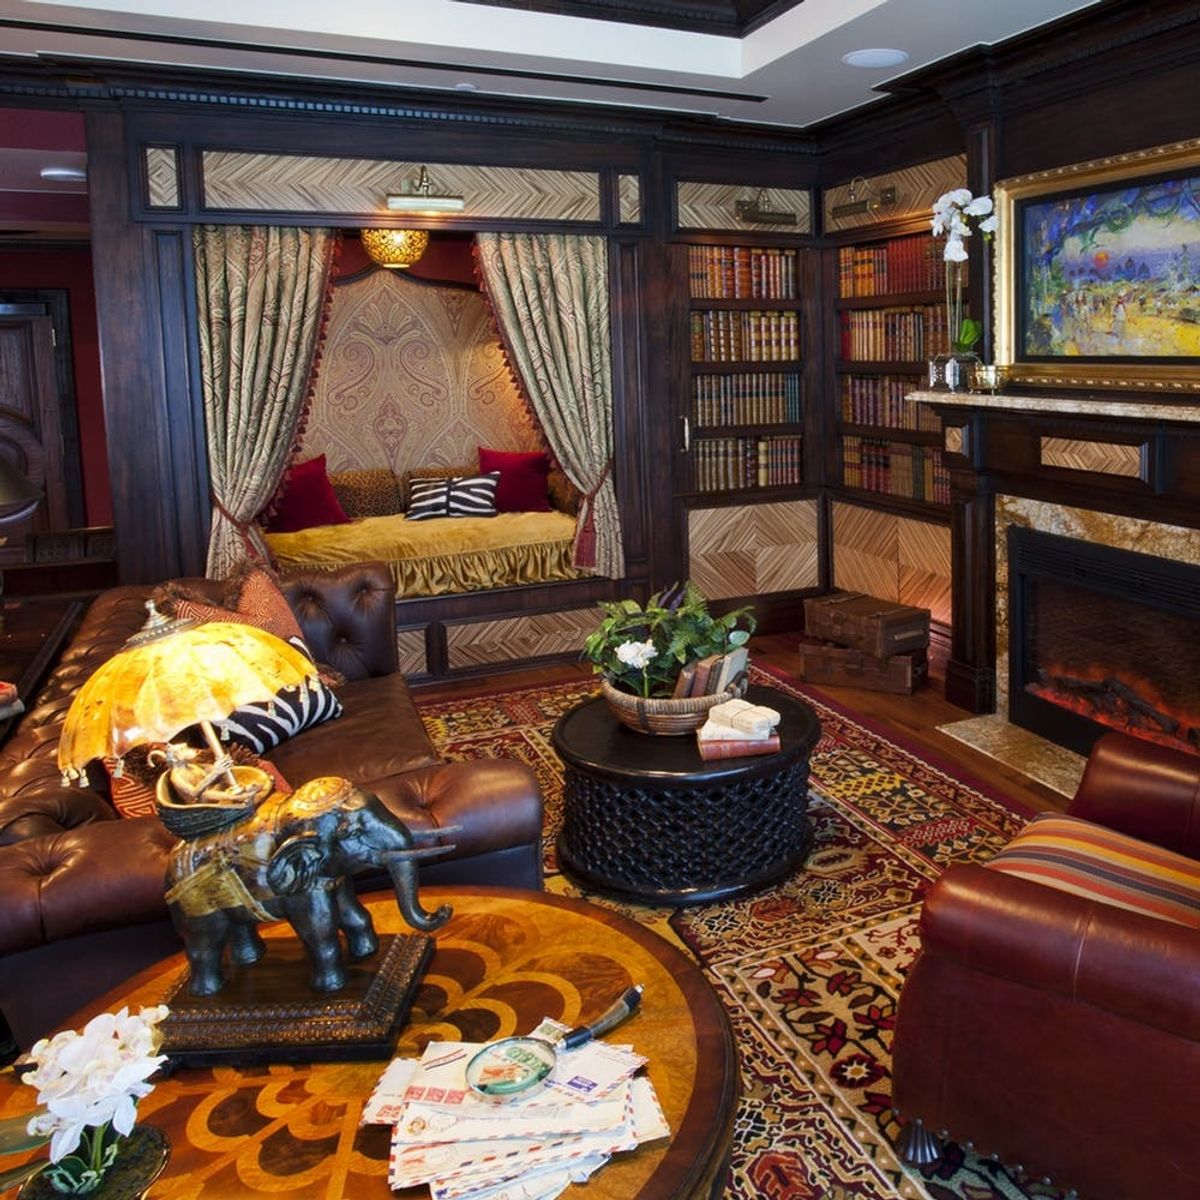 12 Most Amazing Disney Hotel Rooms in the World